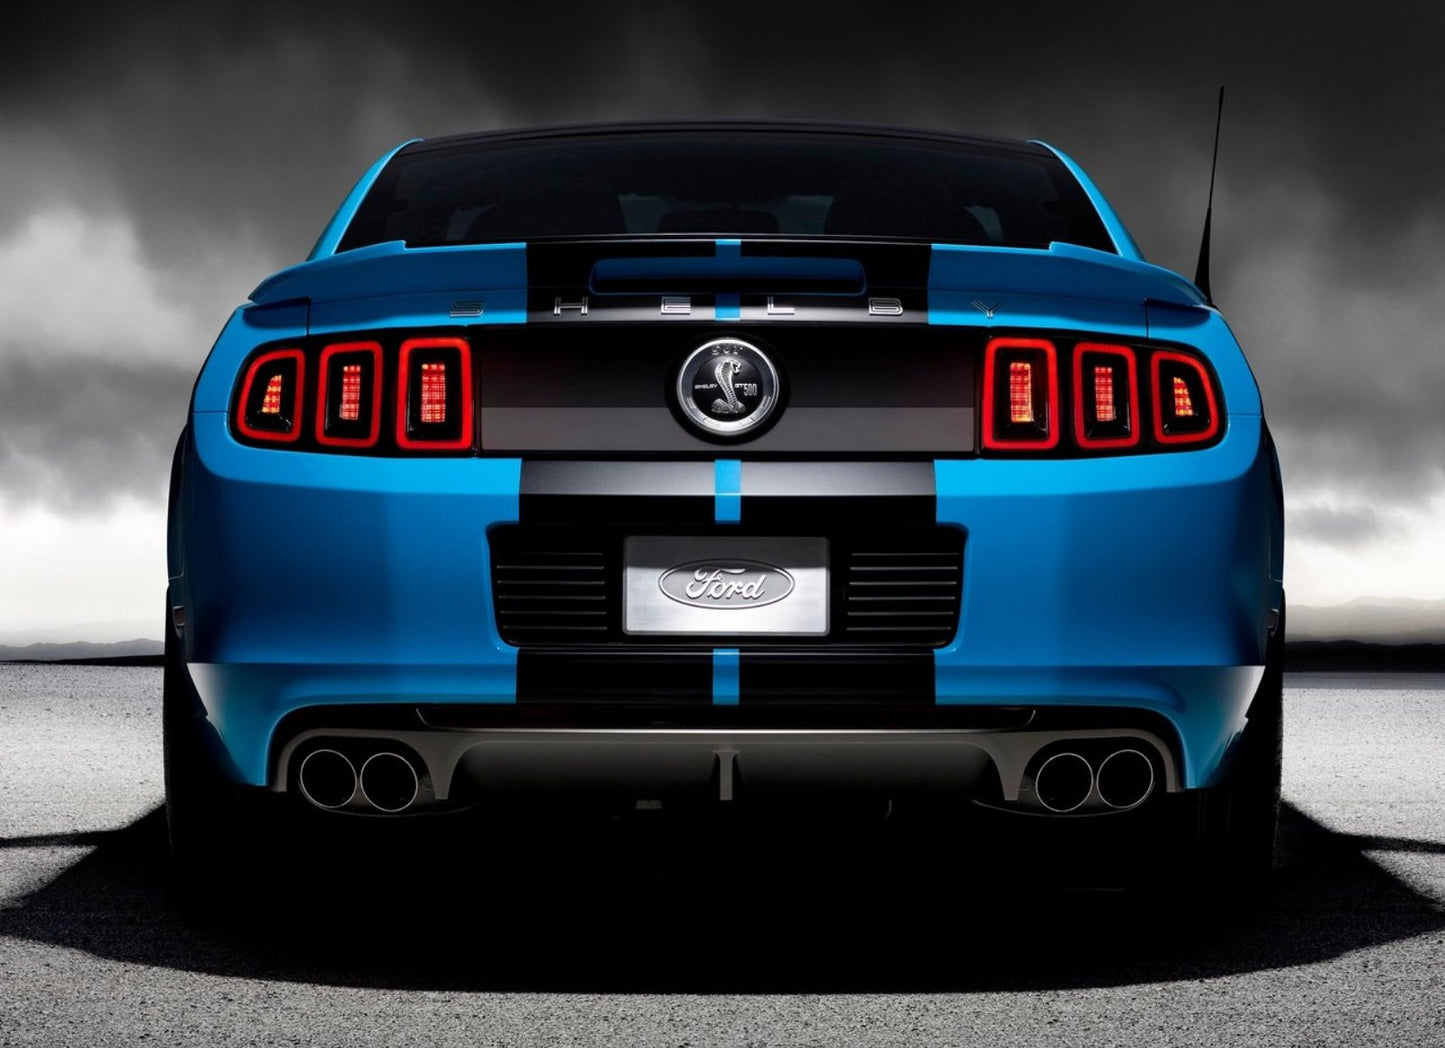 2013 -2014 FORD MUSTANG DUAL 10" FACTORY SHELBY STYLE RACING STRIPES